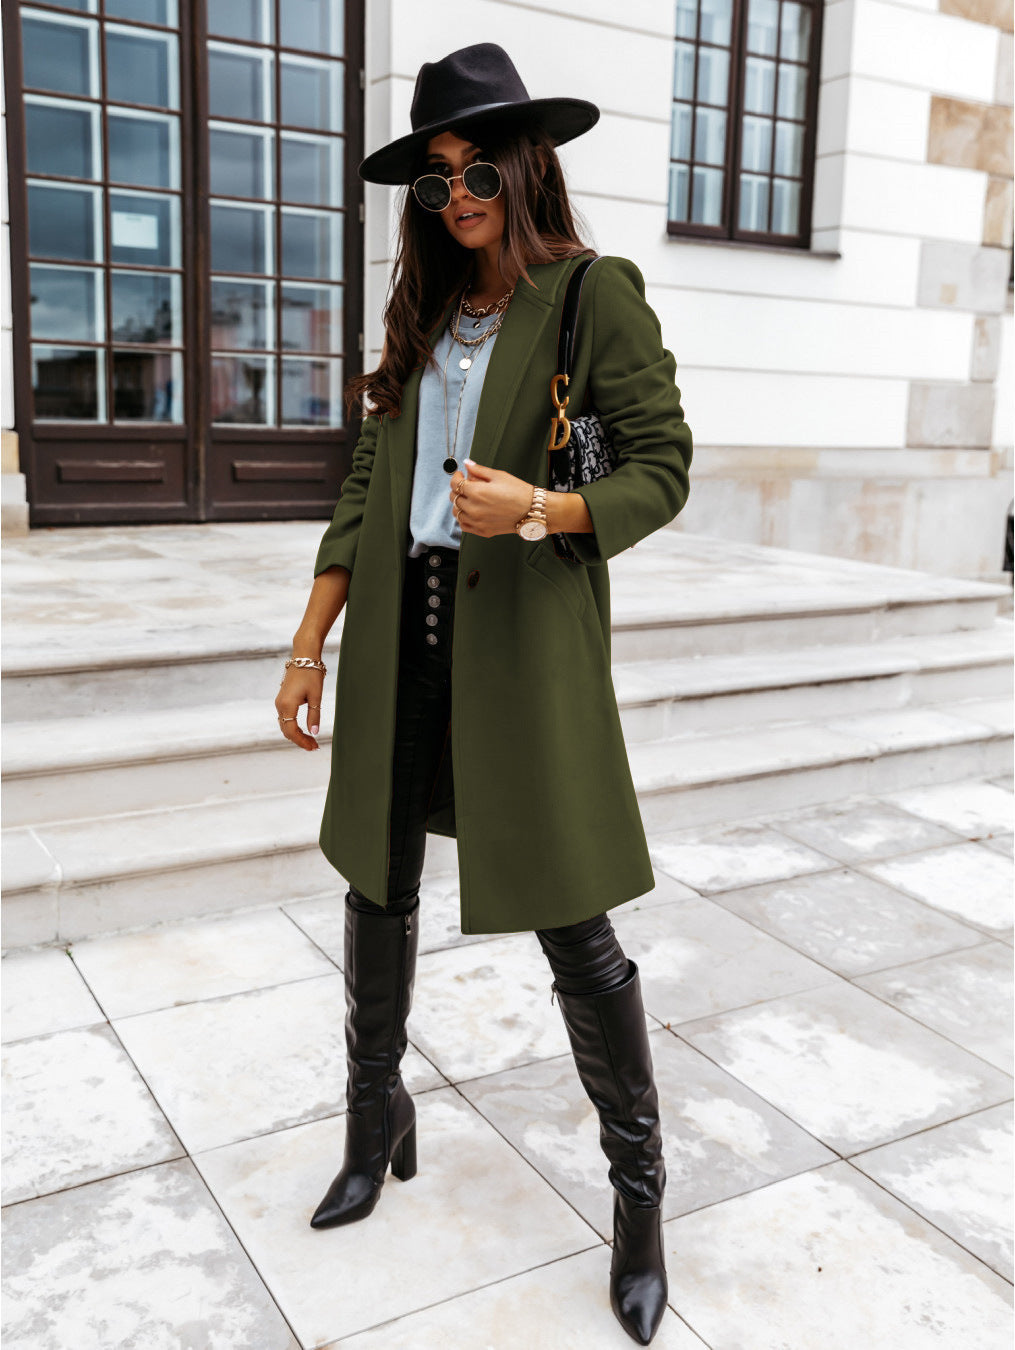 Autumn Winter Solid Color Collared Mid Length Button Woolen Coat Outerwear Women